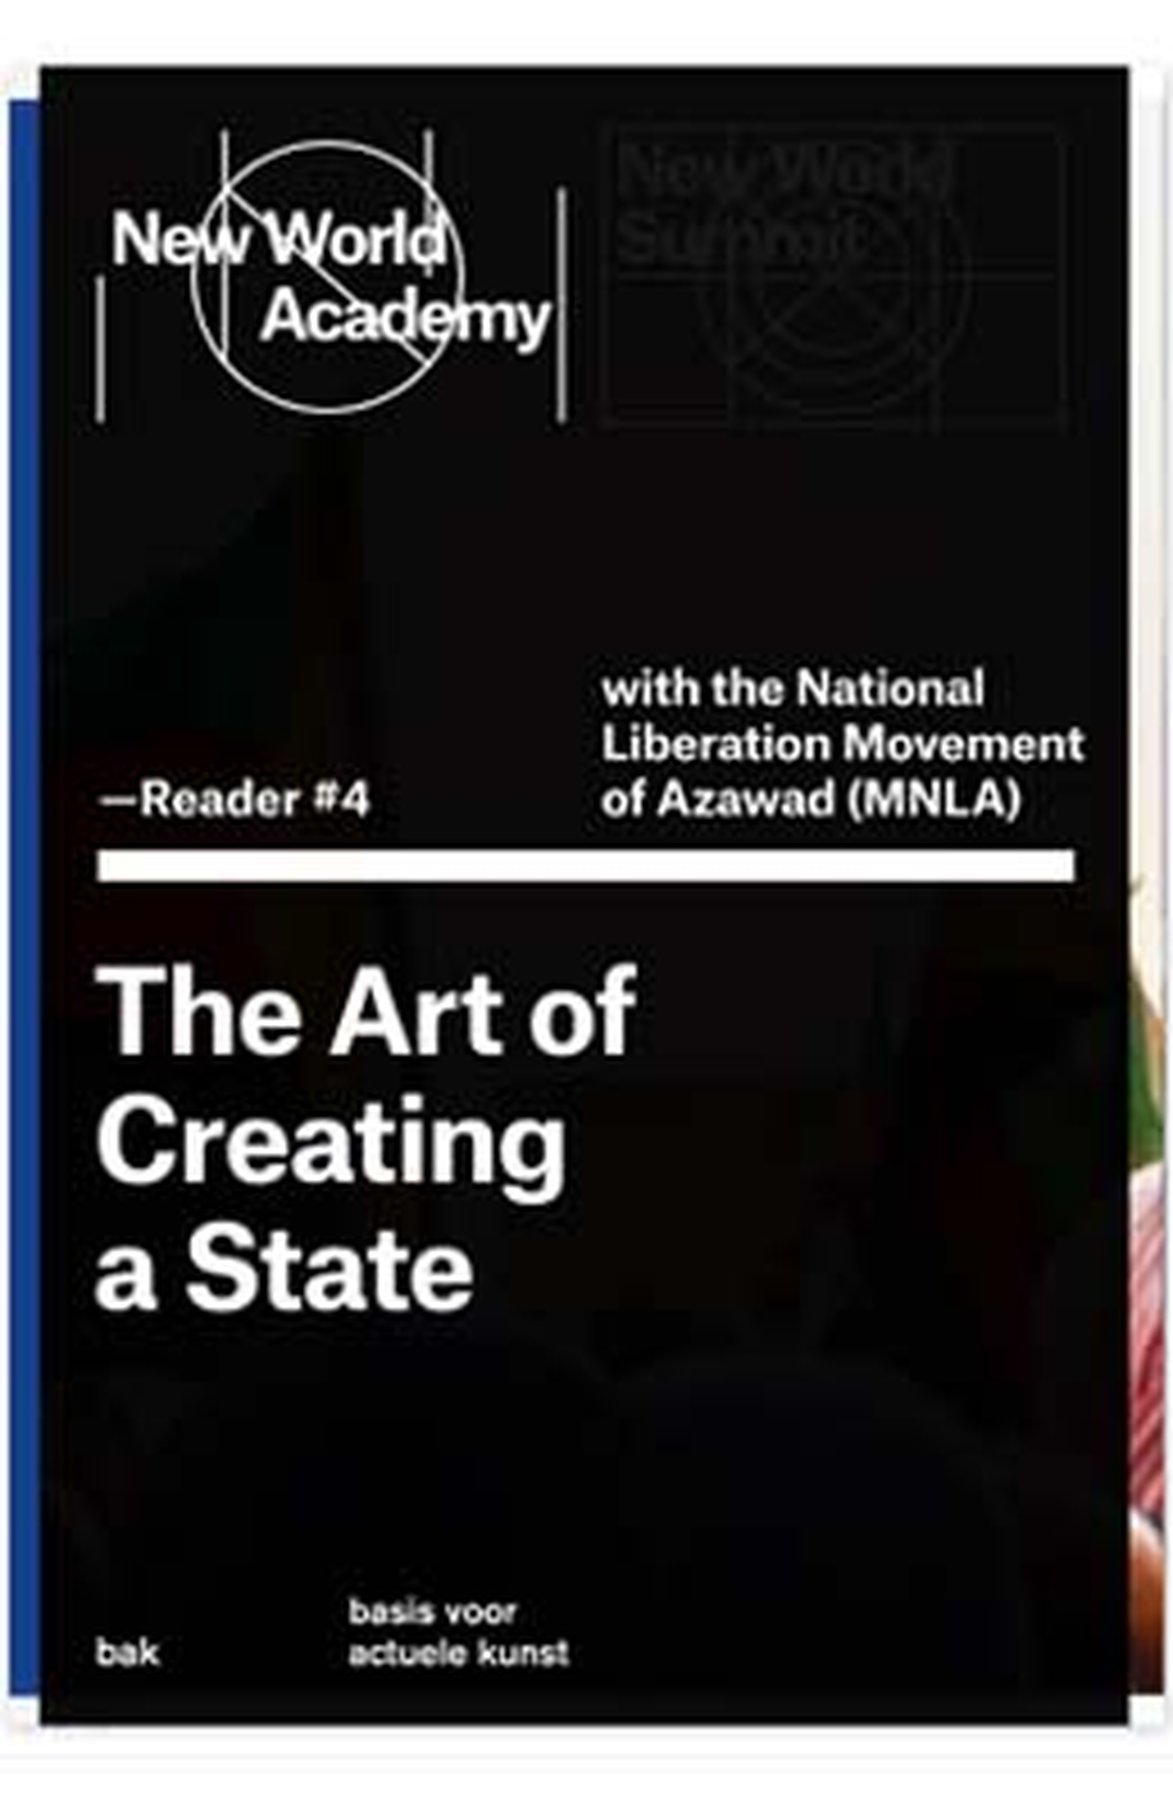 THE ART OF CREATING A STATE. Selection of texts on the role of art and culture in the history of the revolutionary National Liberation Movement of Azawad, edited by Moussa Ag Assarid and Jonas Staal. BAK, basis voor actuele kunst, Utrecht, 2014